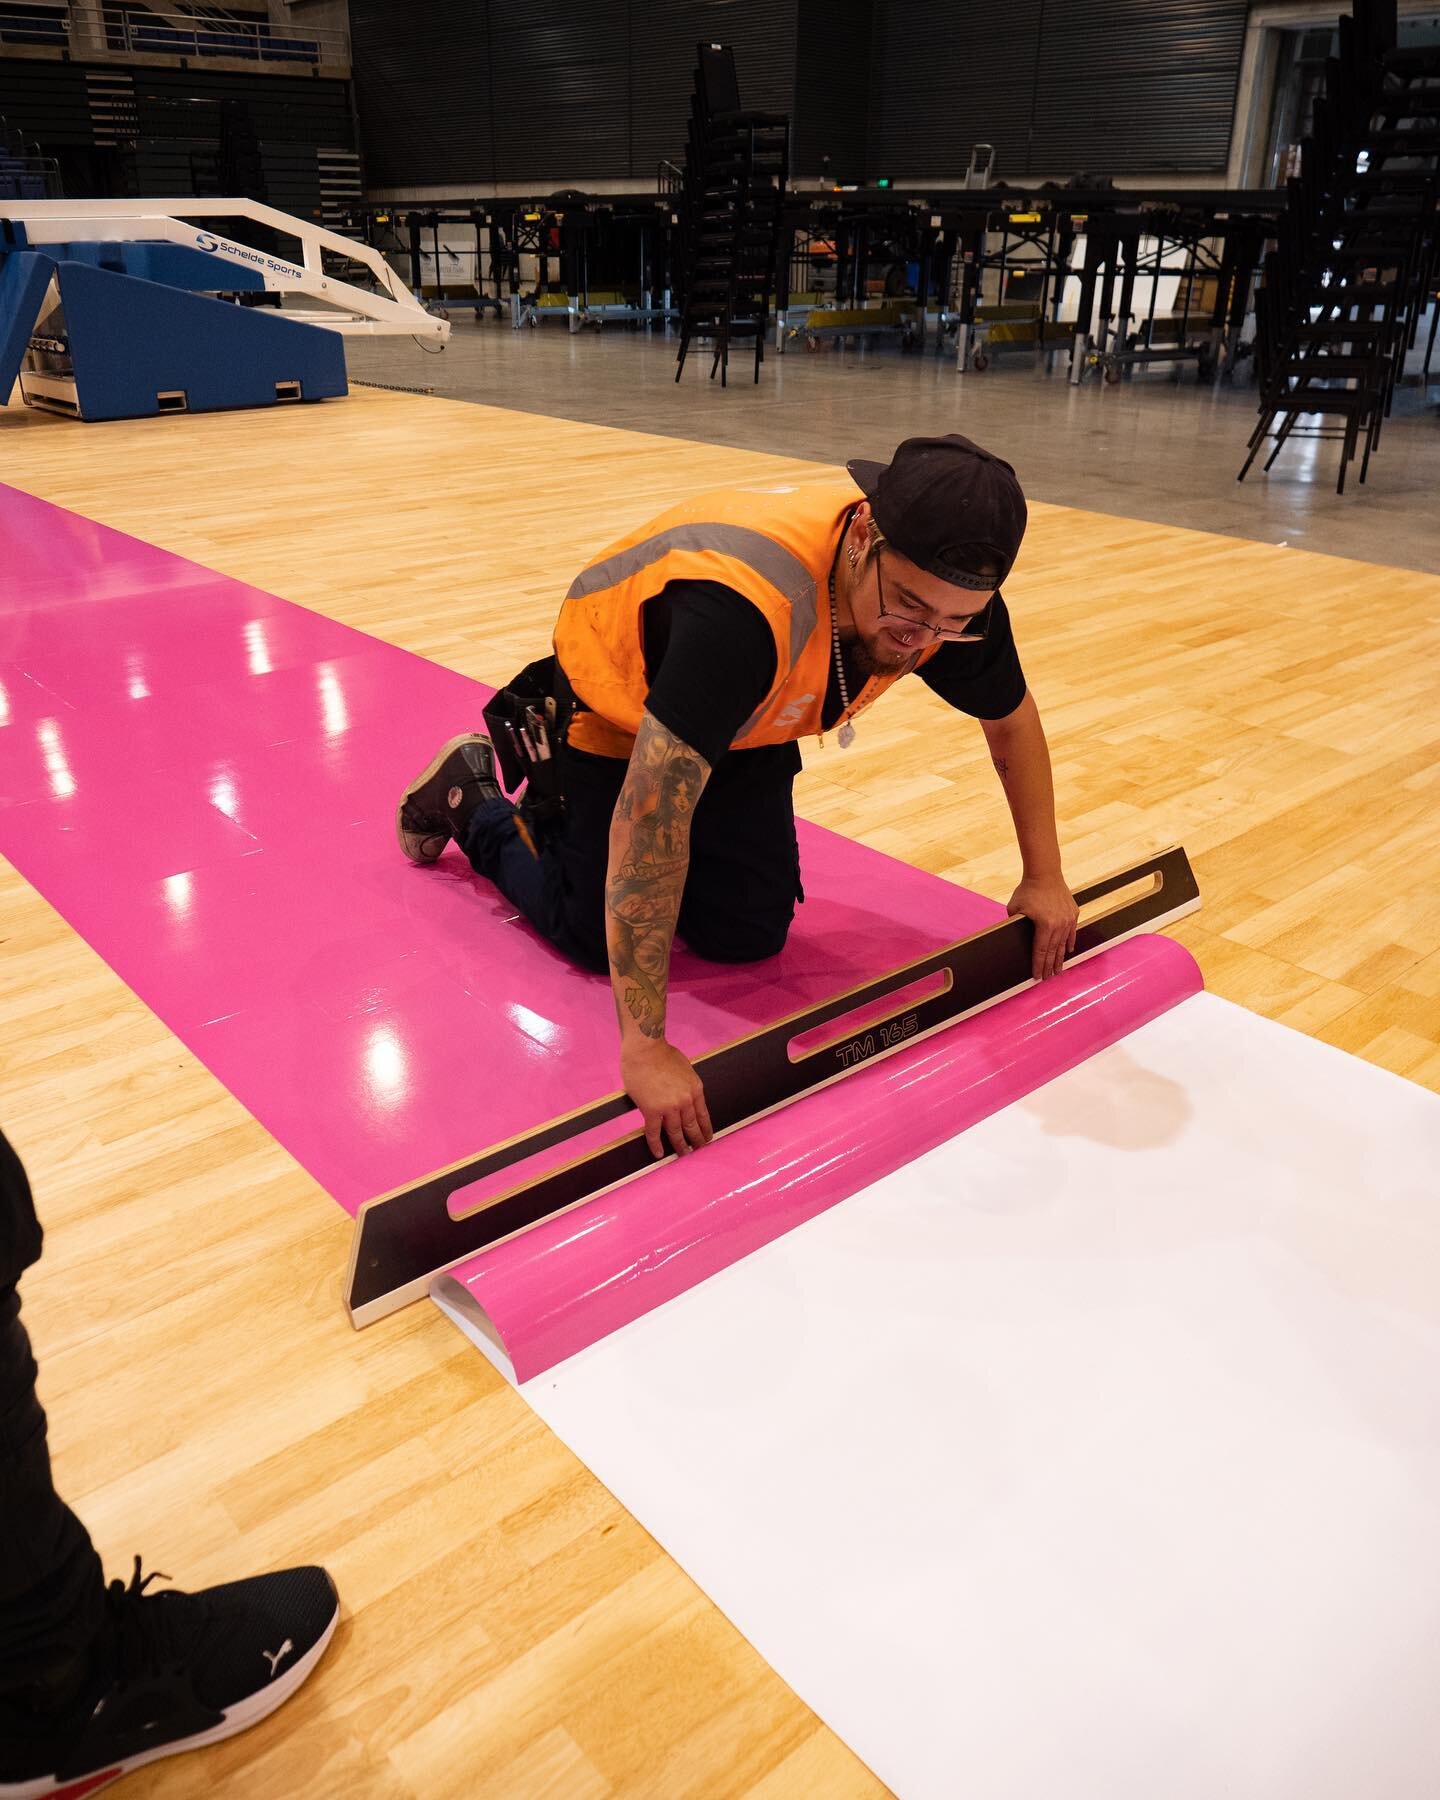 It can be a pretty daunting task rocking up to the Christchurch Arena with 200m of graphics to apply to a blank basketball court with a limited amount of time before the players turn up for a practice on the eve of game night!

But&hellip; we LOVE IT